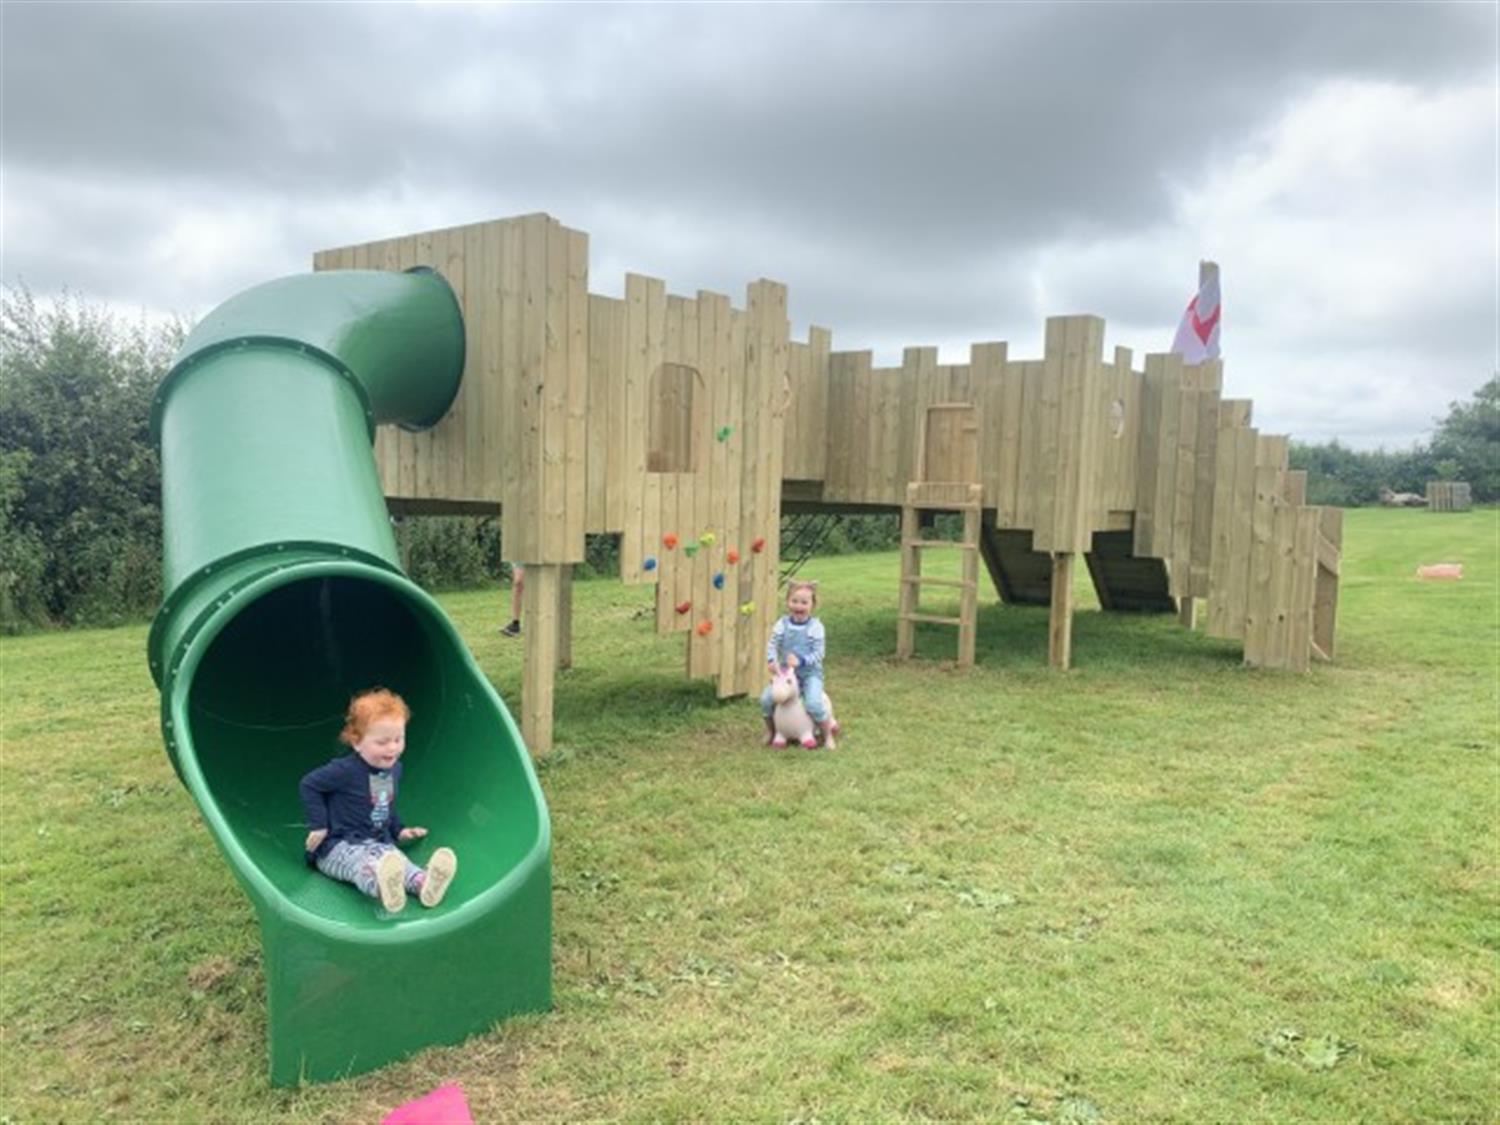 A picture of an adventure play park created by Pentagon Play for Chew Moos. The image shows a child happily sliding down a slide, with another child on a toy horse. 